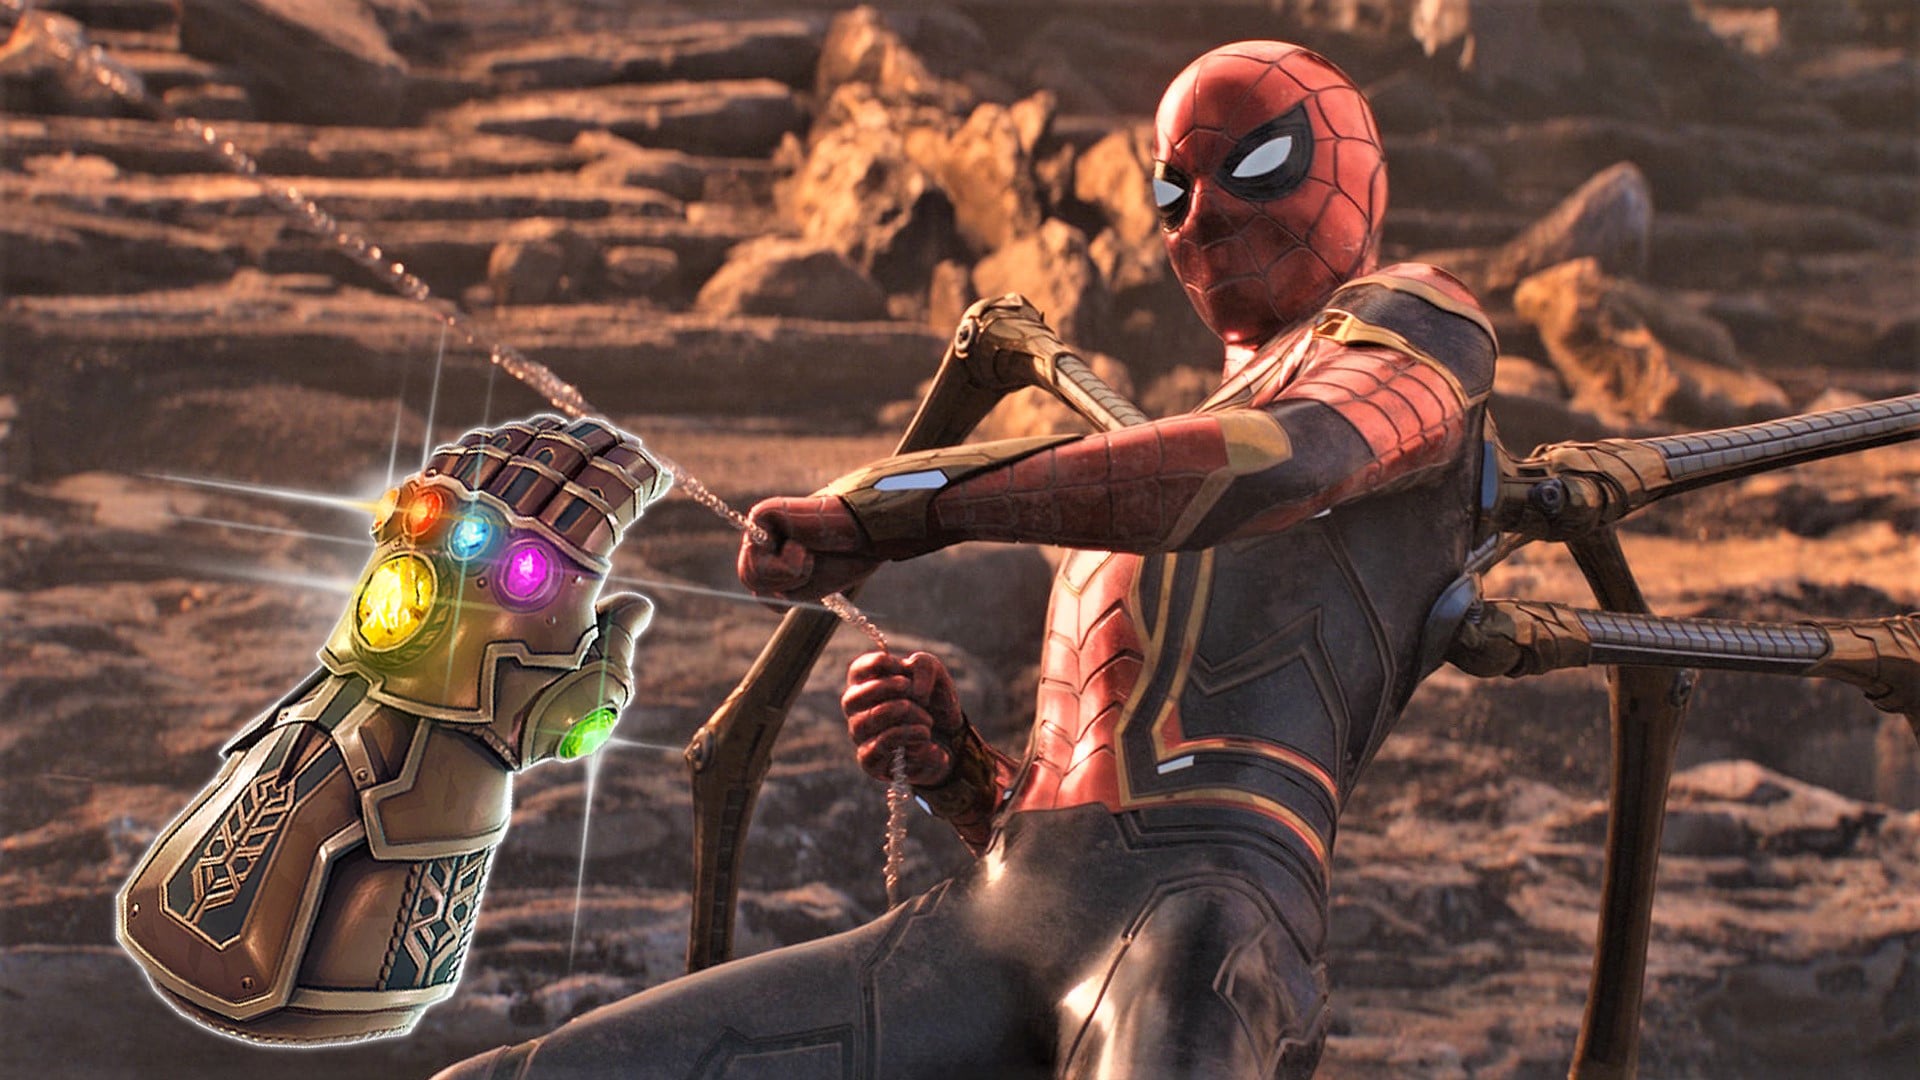 Infinity War Screen Capture Shows How Close Spider-Man Was To Getting The  Gauntlet Off Thanos - Animated Times